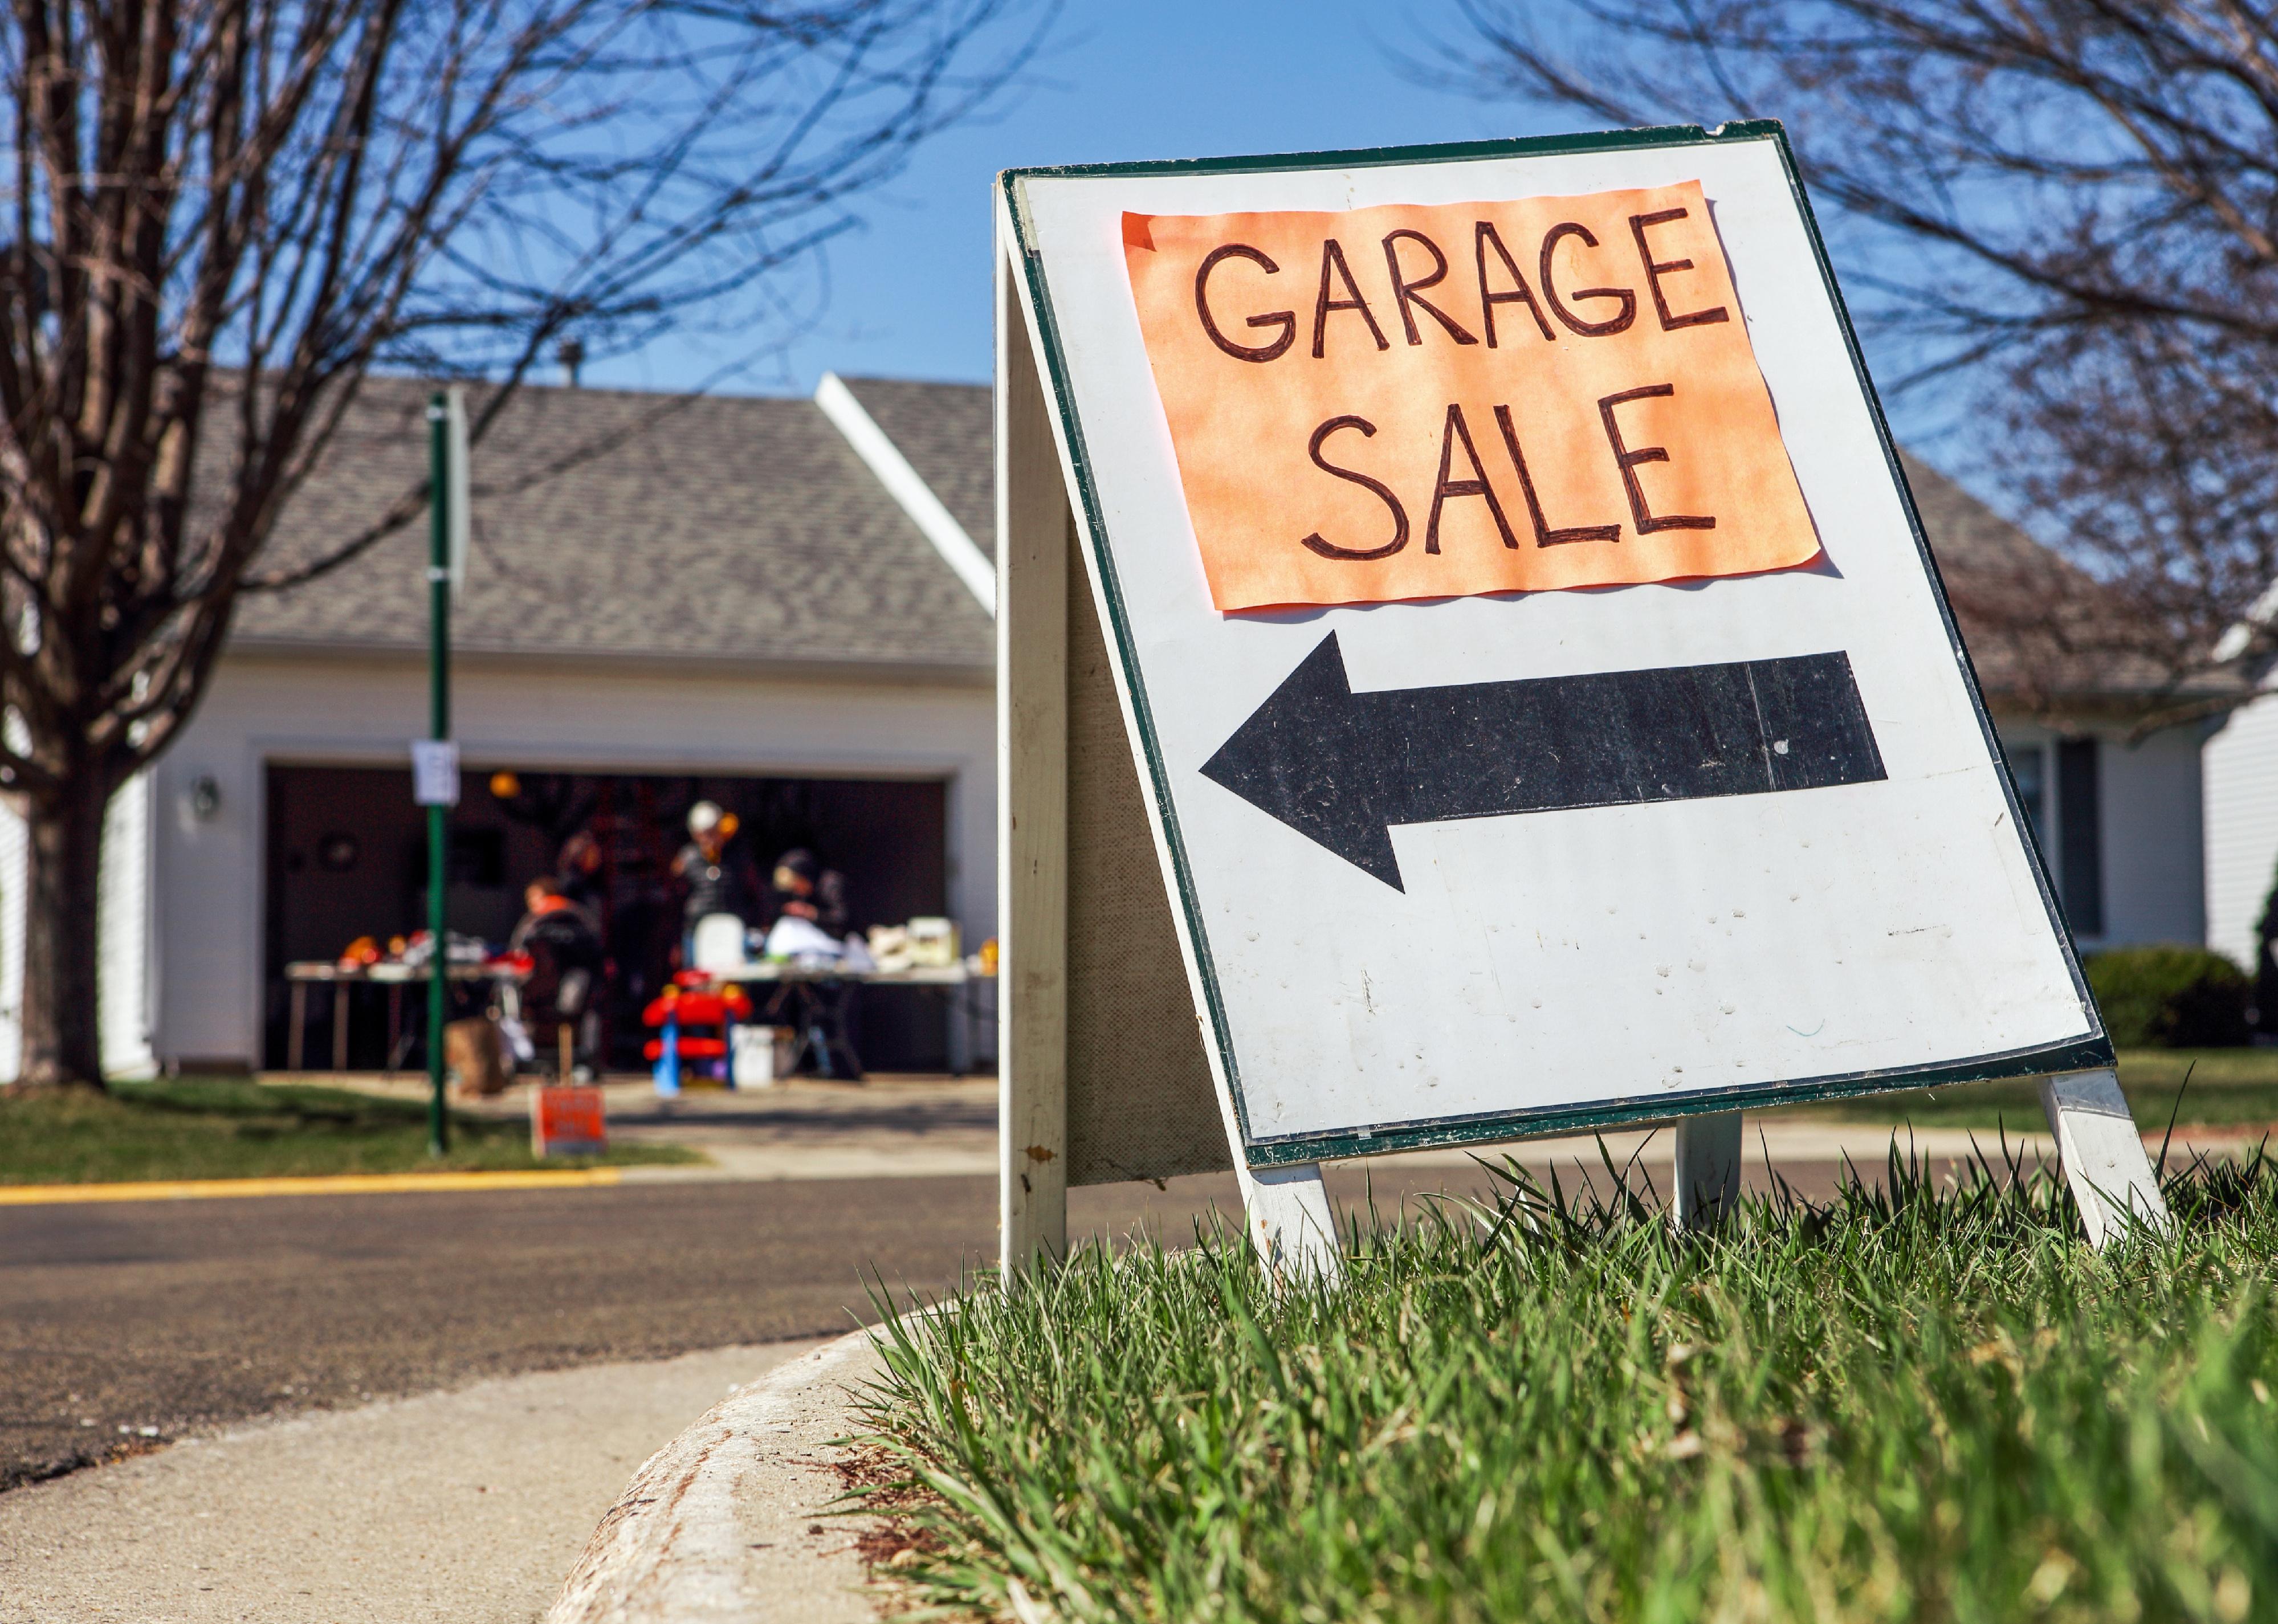 <p>Most Americans call it a yard sale or garage sale, but in some areas of Massachusetts, Connecticut, or eastern Wiscsonsin, the names <a href="https://www.rd.com/list/regional-sayings-phrases-words/">"tag sale" or "rummage sale"</a> could be used instead. Rummage sale was <a href="https://www.encyclopedia.com/humanities/encyclopedias-almanacs-transcripts-and-maps/garage-and-yard-sales">first used to refer to</a> sales meant to raise money for charity in the 1960s, before being applied more generally. Throughout the 1970s, an increasing number of sales being held in front yards and from inside homeowners' garages led to the terms "garage sale" and "yard sale" increasing in popularity.</p>